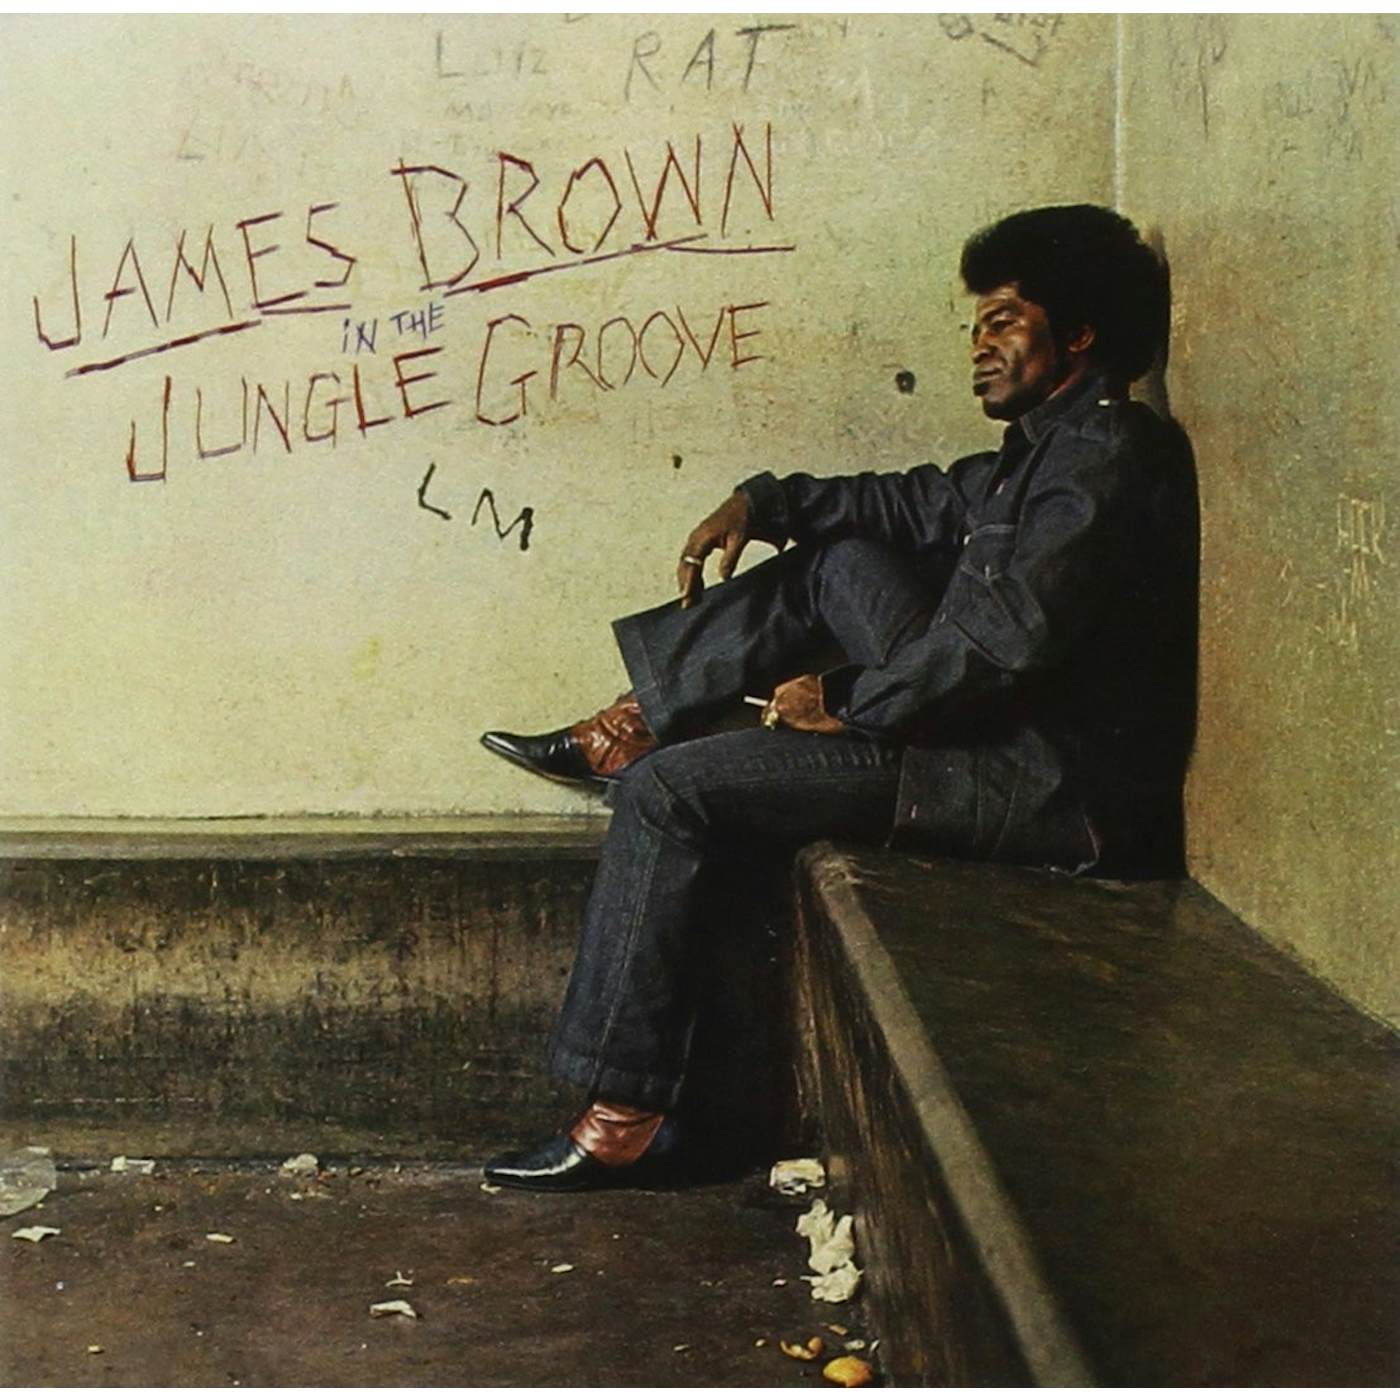 James Brown In the Jungle Groove Vinyl Record